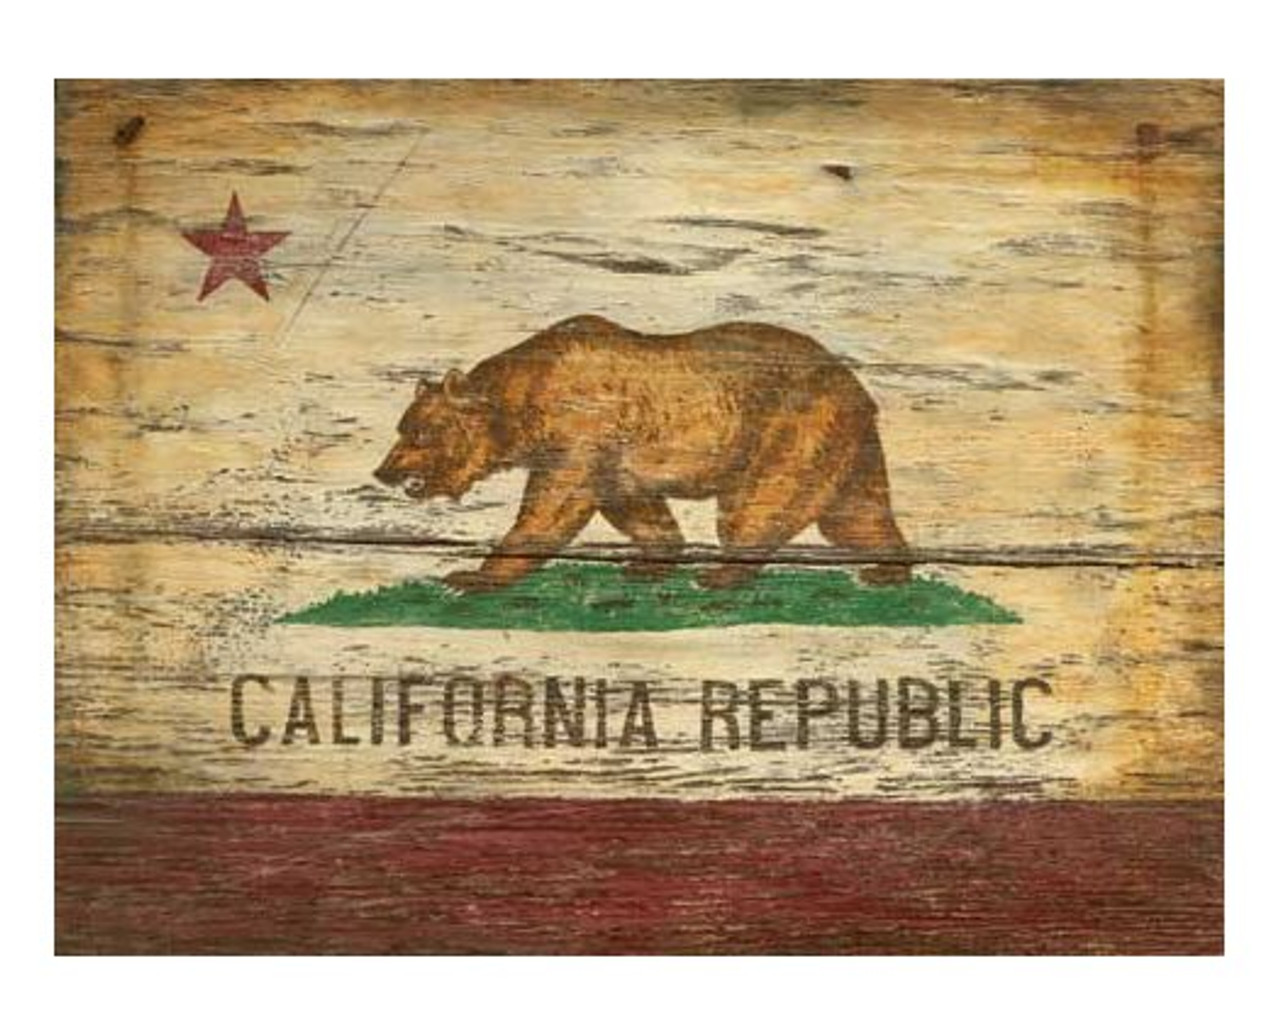 Details about   California Republic State Flag CA USA Bear Outdoor American Banner 3x5 NEW 